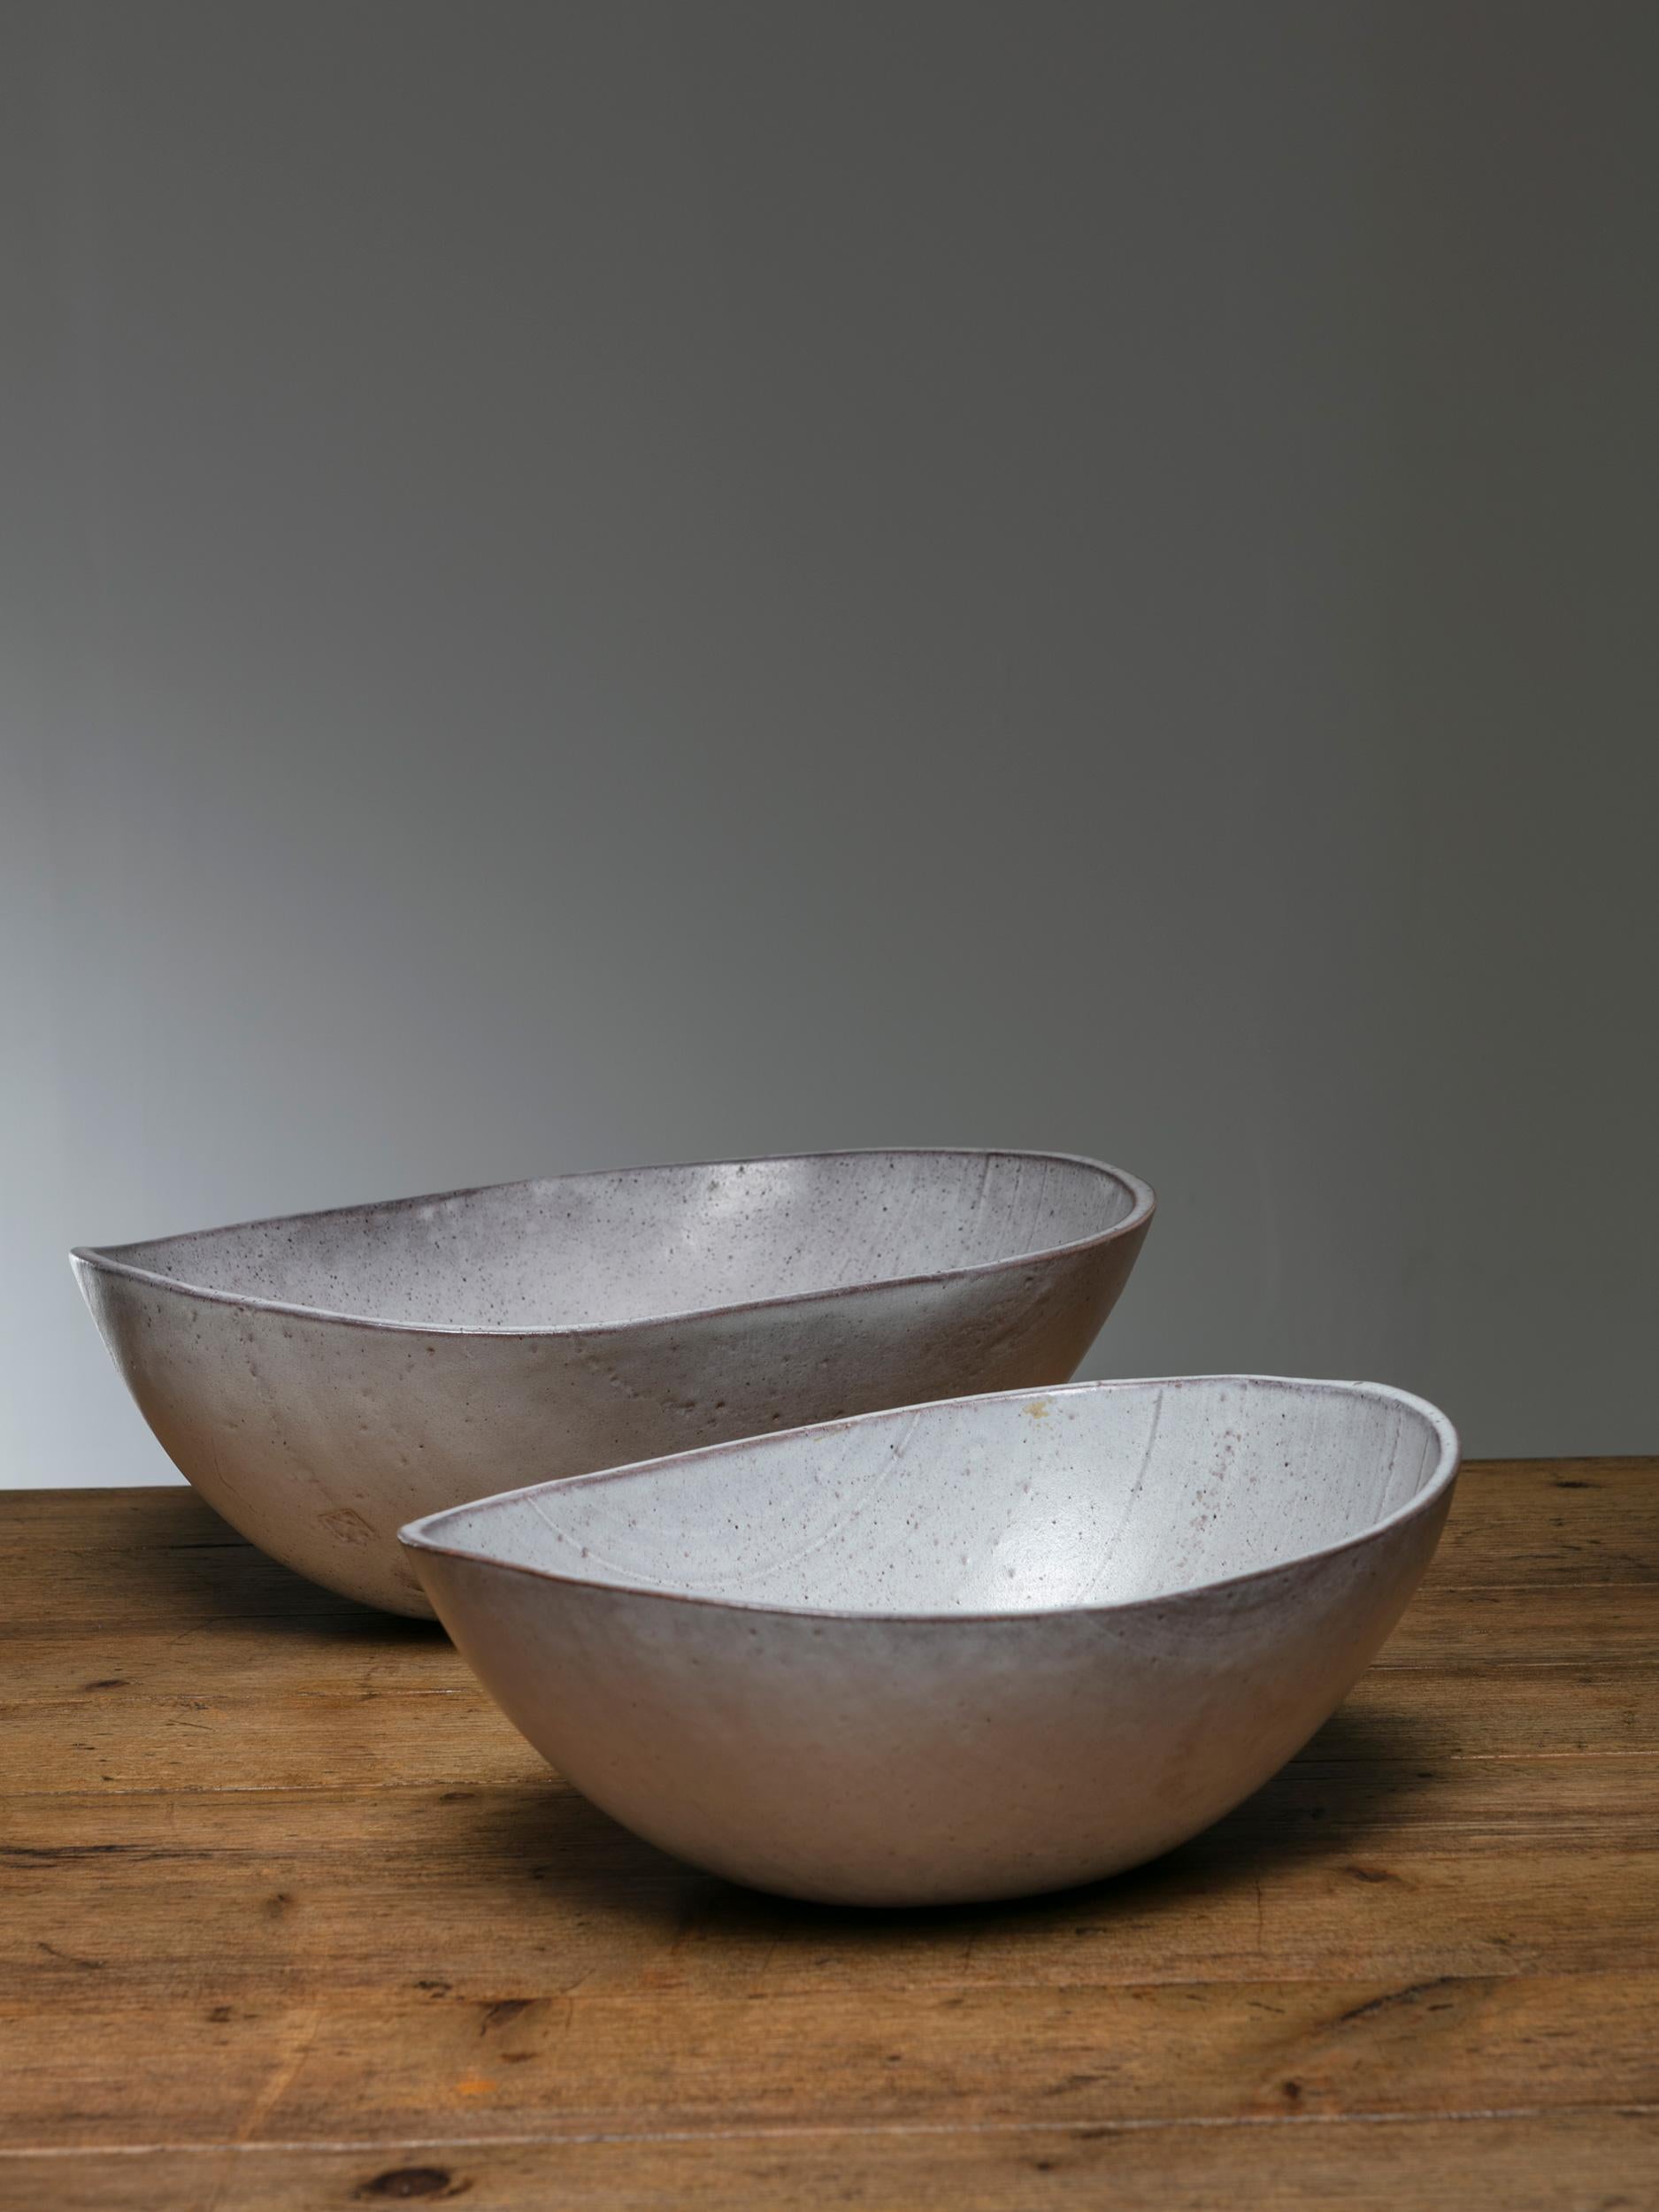 Remarkable pair of large ceramic bowls by Alessio Tasca.